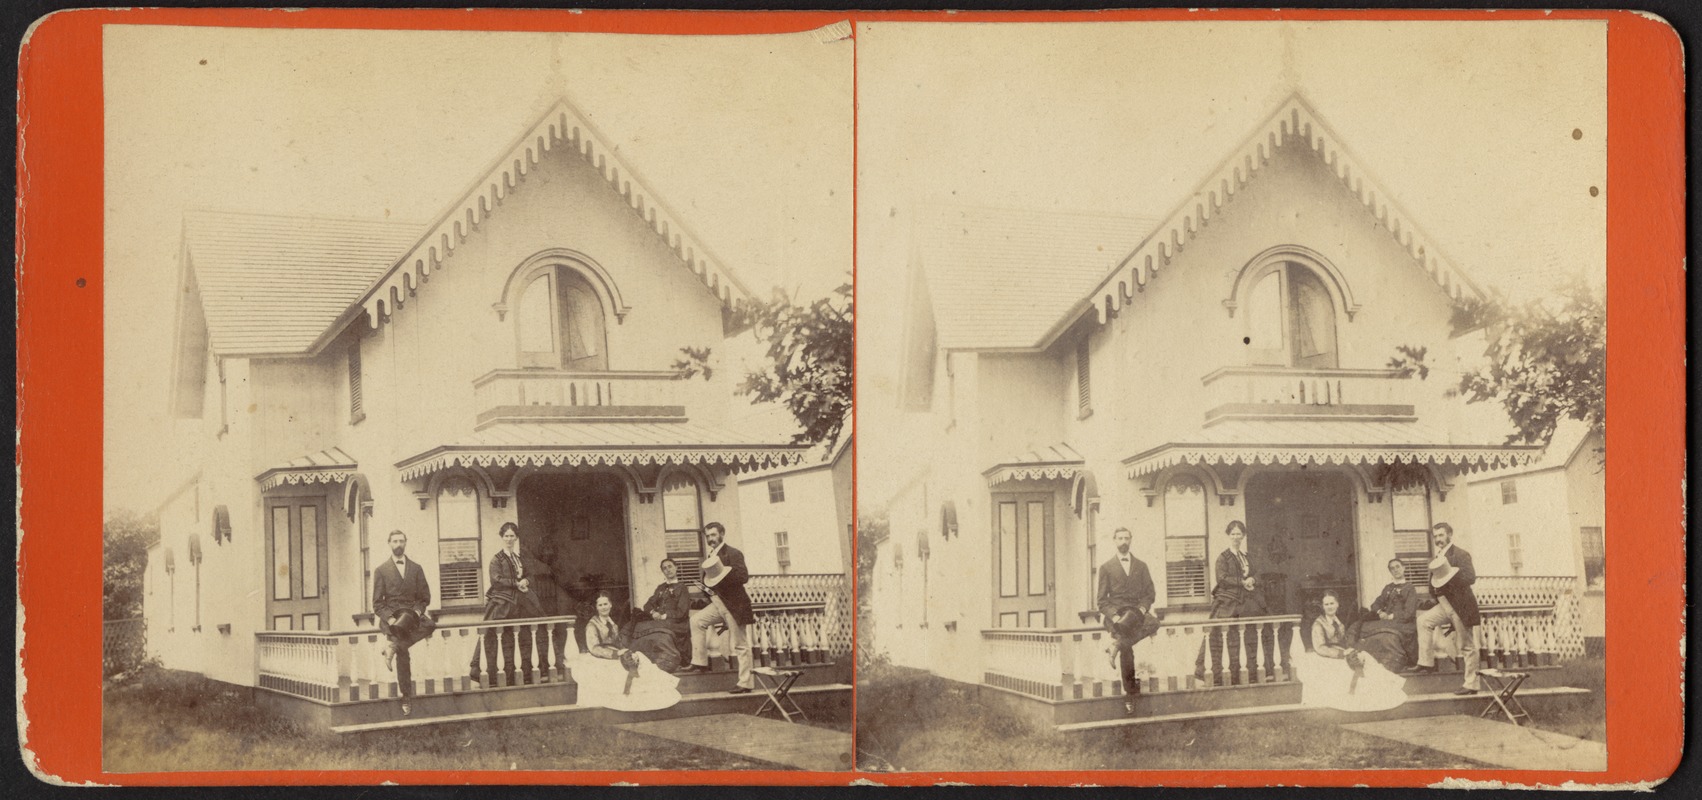 Three women and two men posing for a photograph on the porch of a cottage